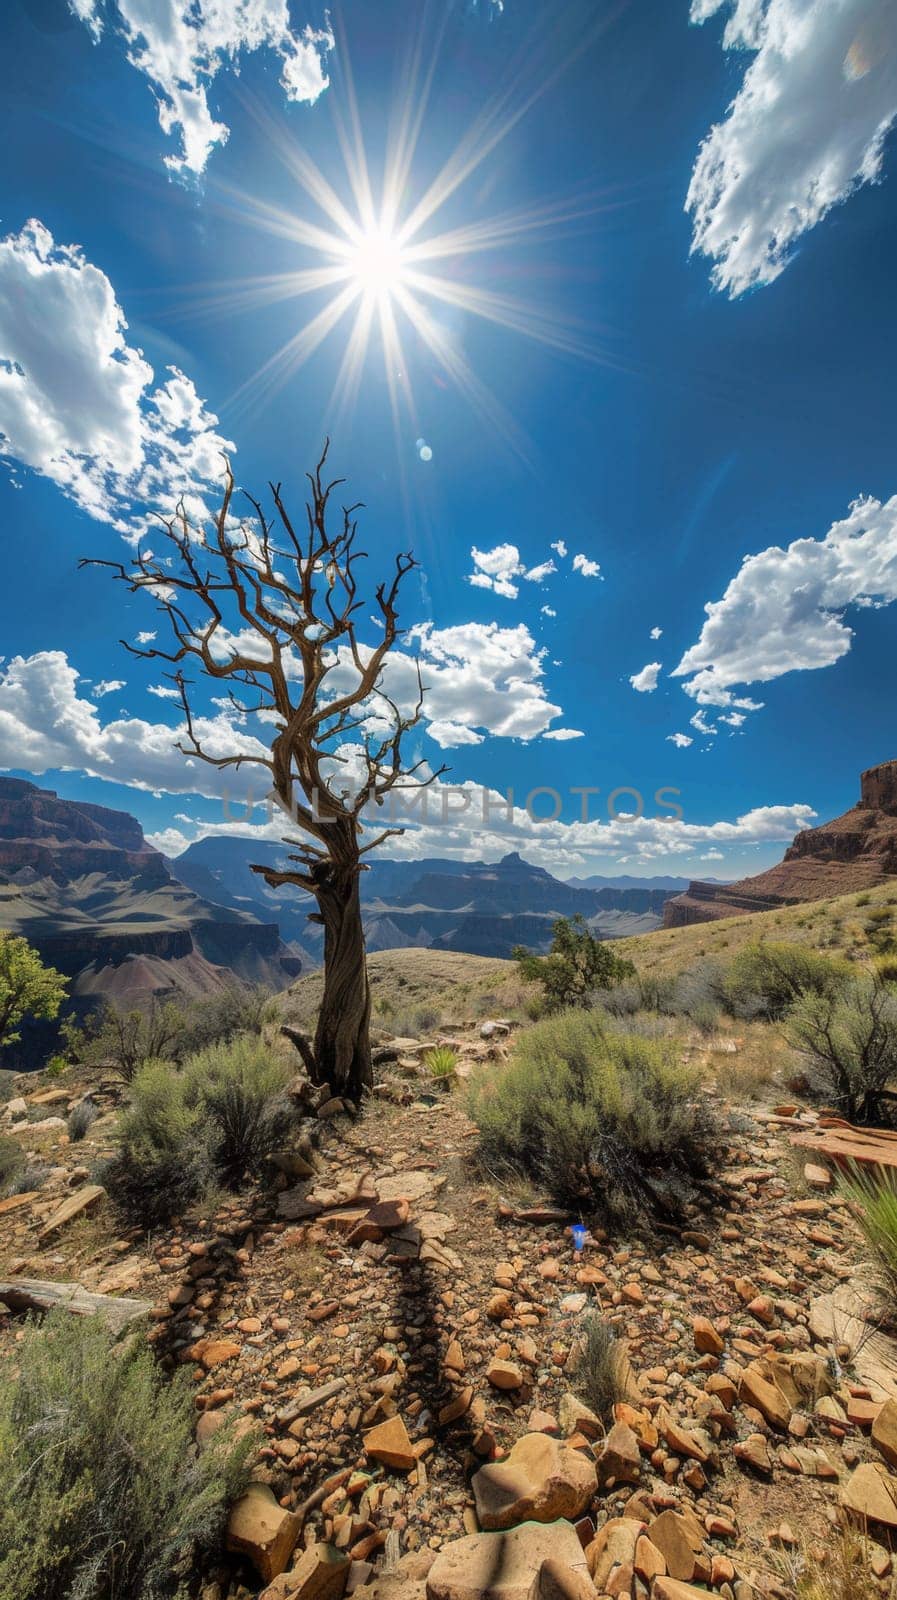 A lone tree in a desert area with the sun shining, AI by starush